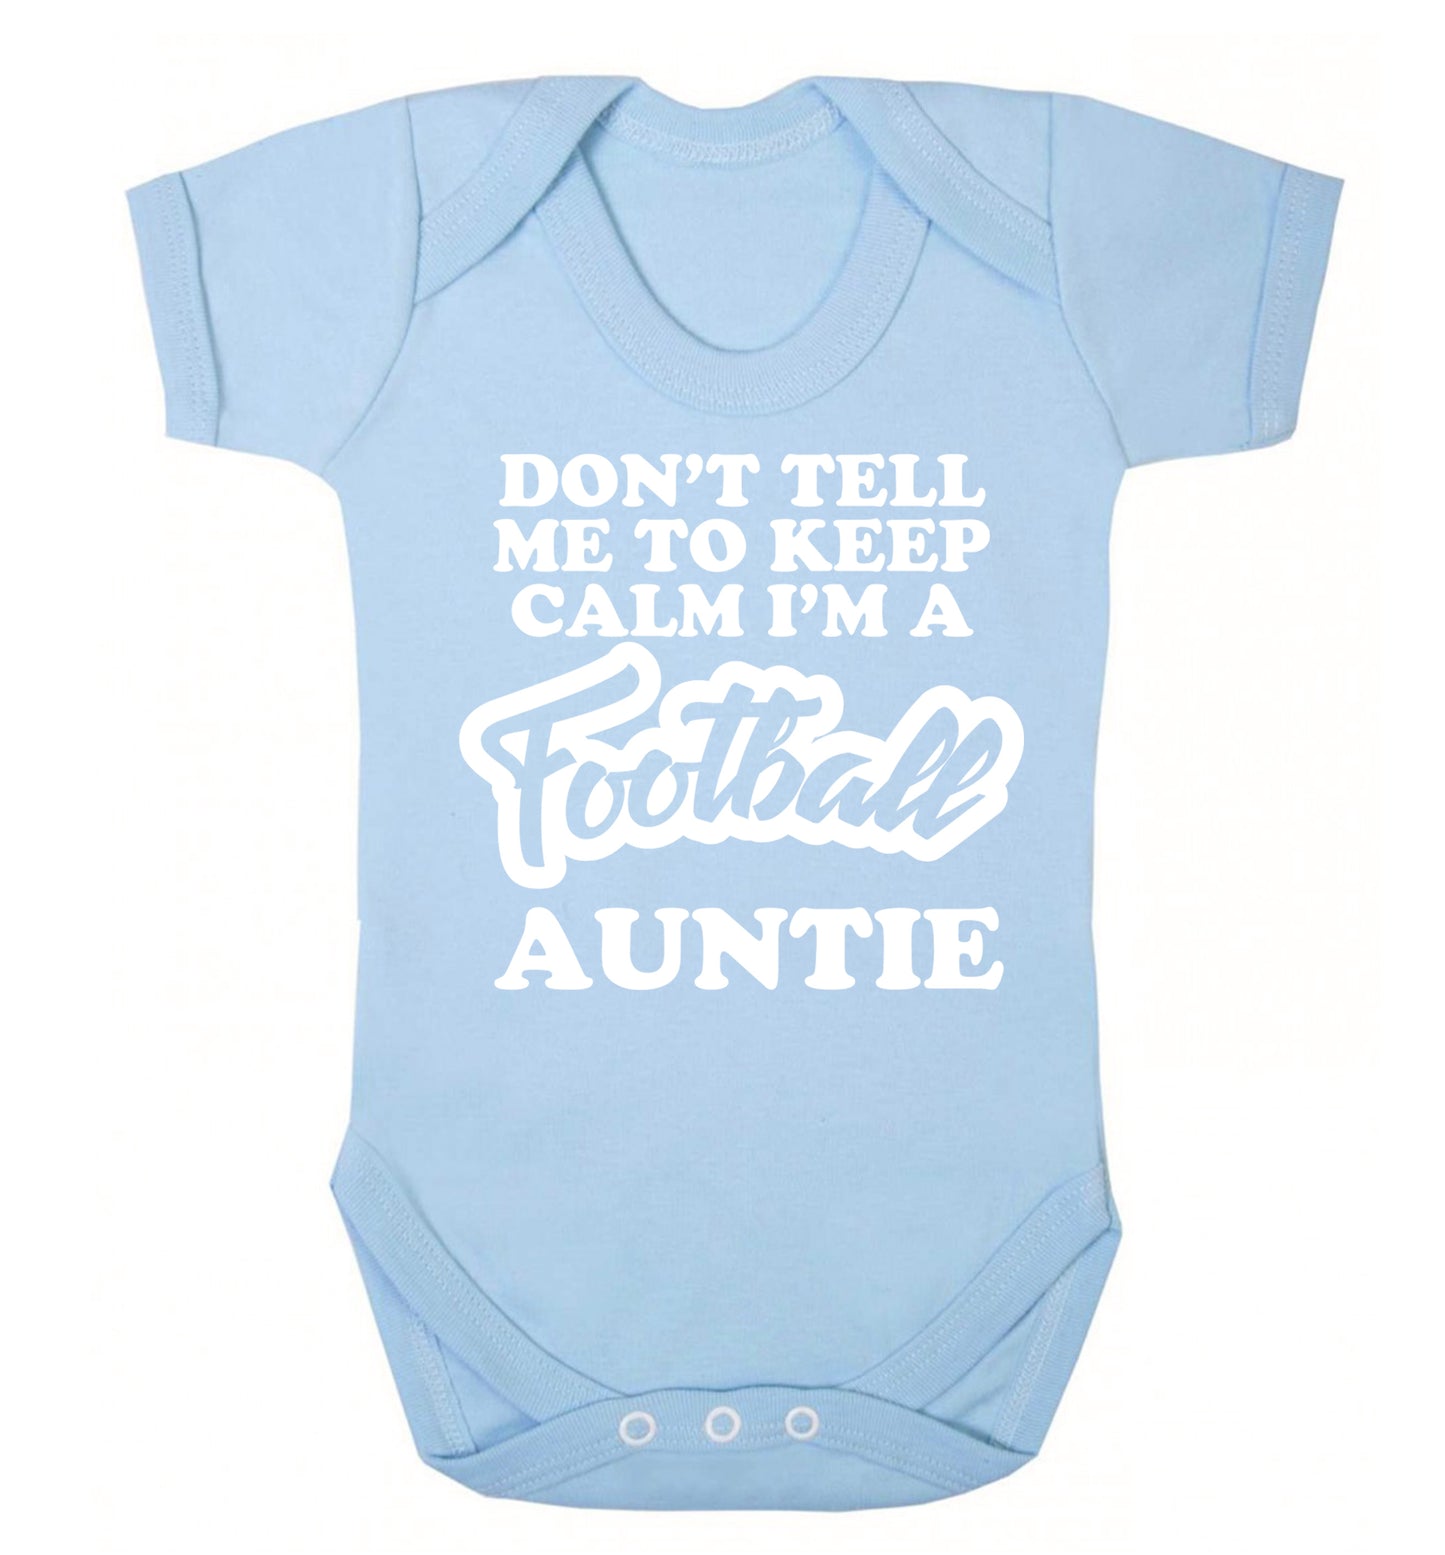 Don't tell me to keep calm I'm a football auntie Baby Vest pale blue 18-24 months